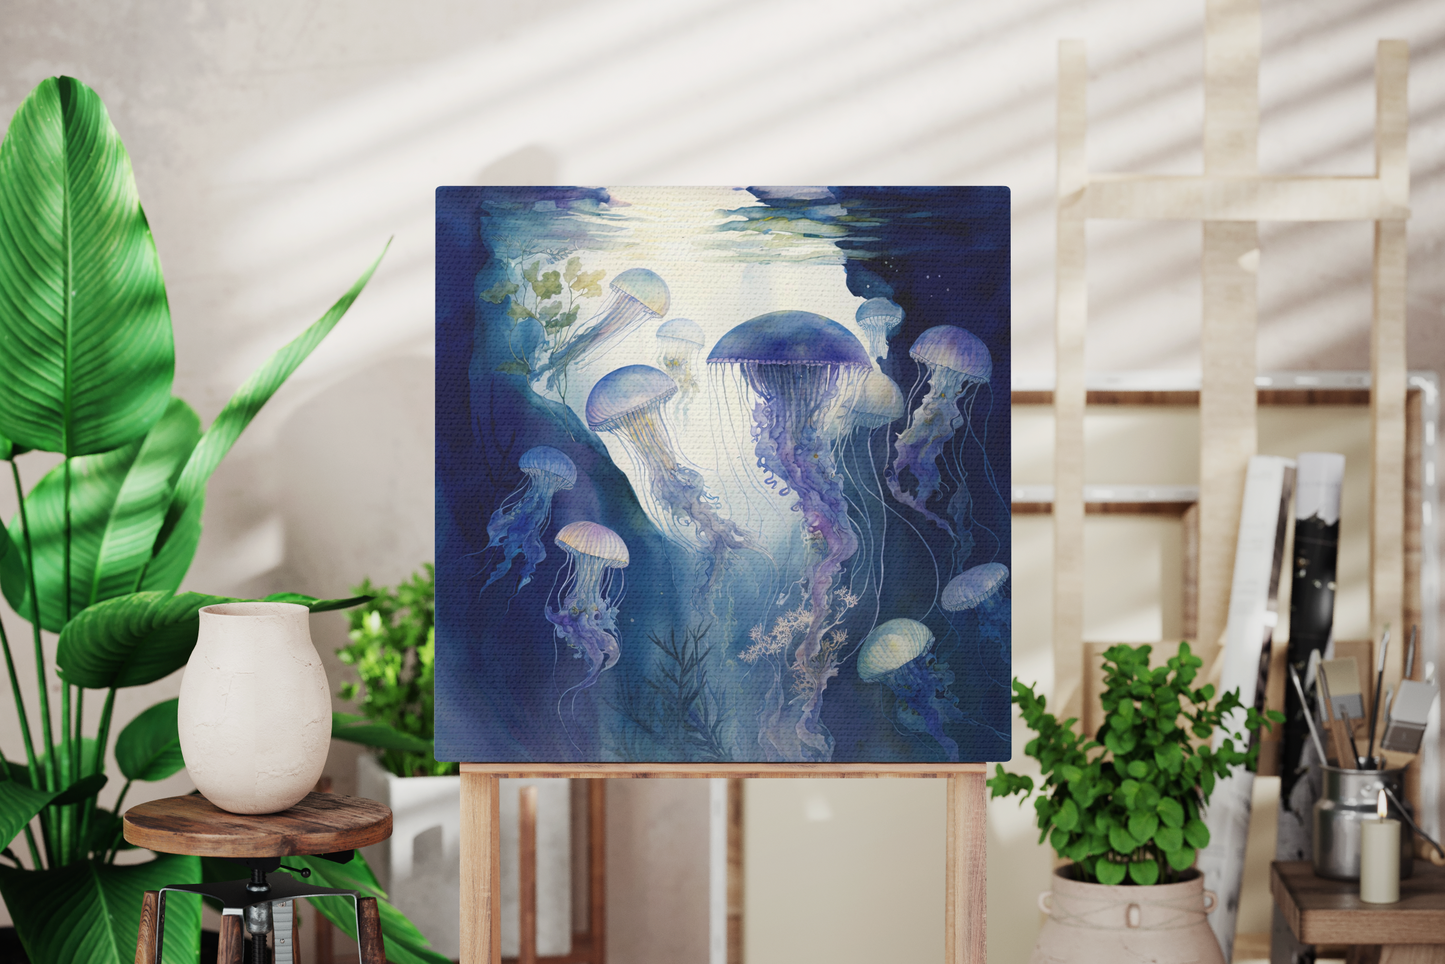 jellyfish canvas hanging in a coastal theme room, under the sea jellyfish canvas art design hanging on a nautical theme room wall, ocean jellyfish canvas on an easel, jellyfish wall decor